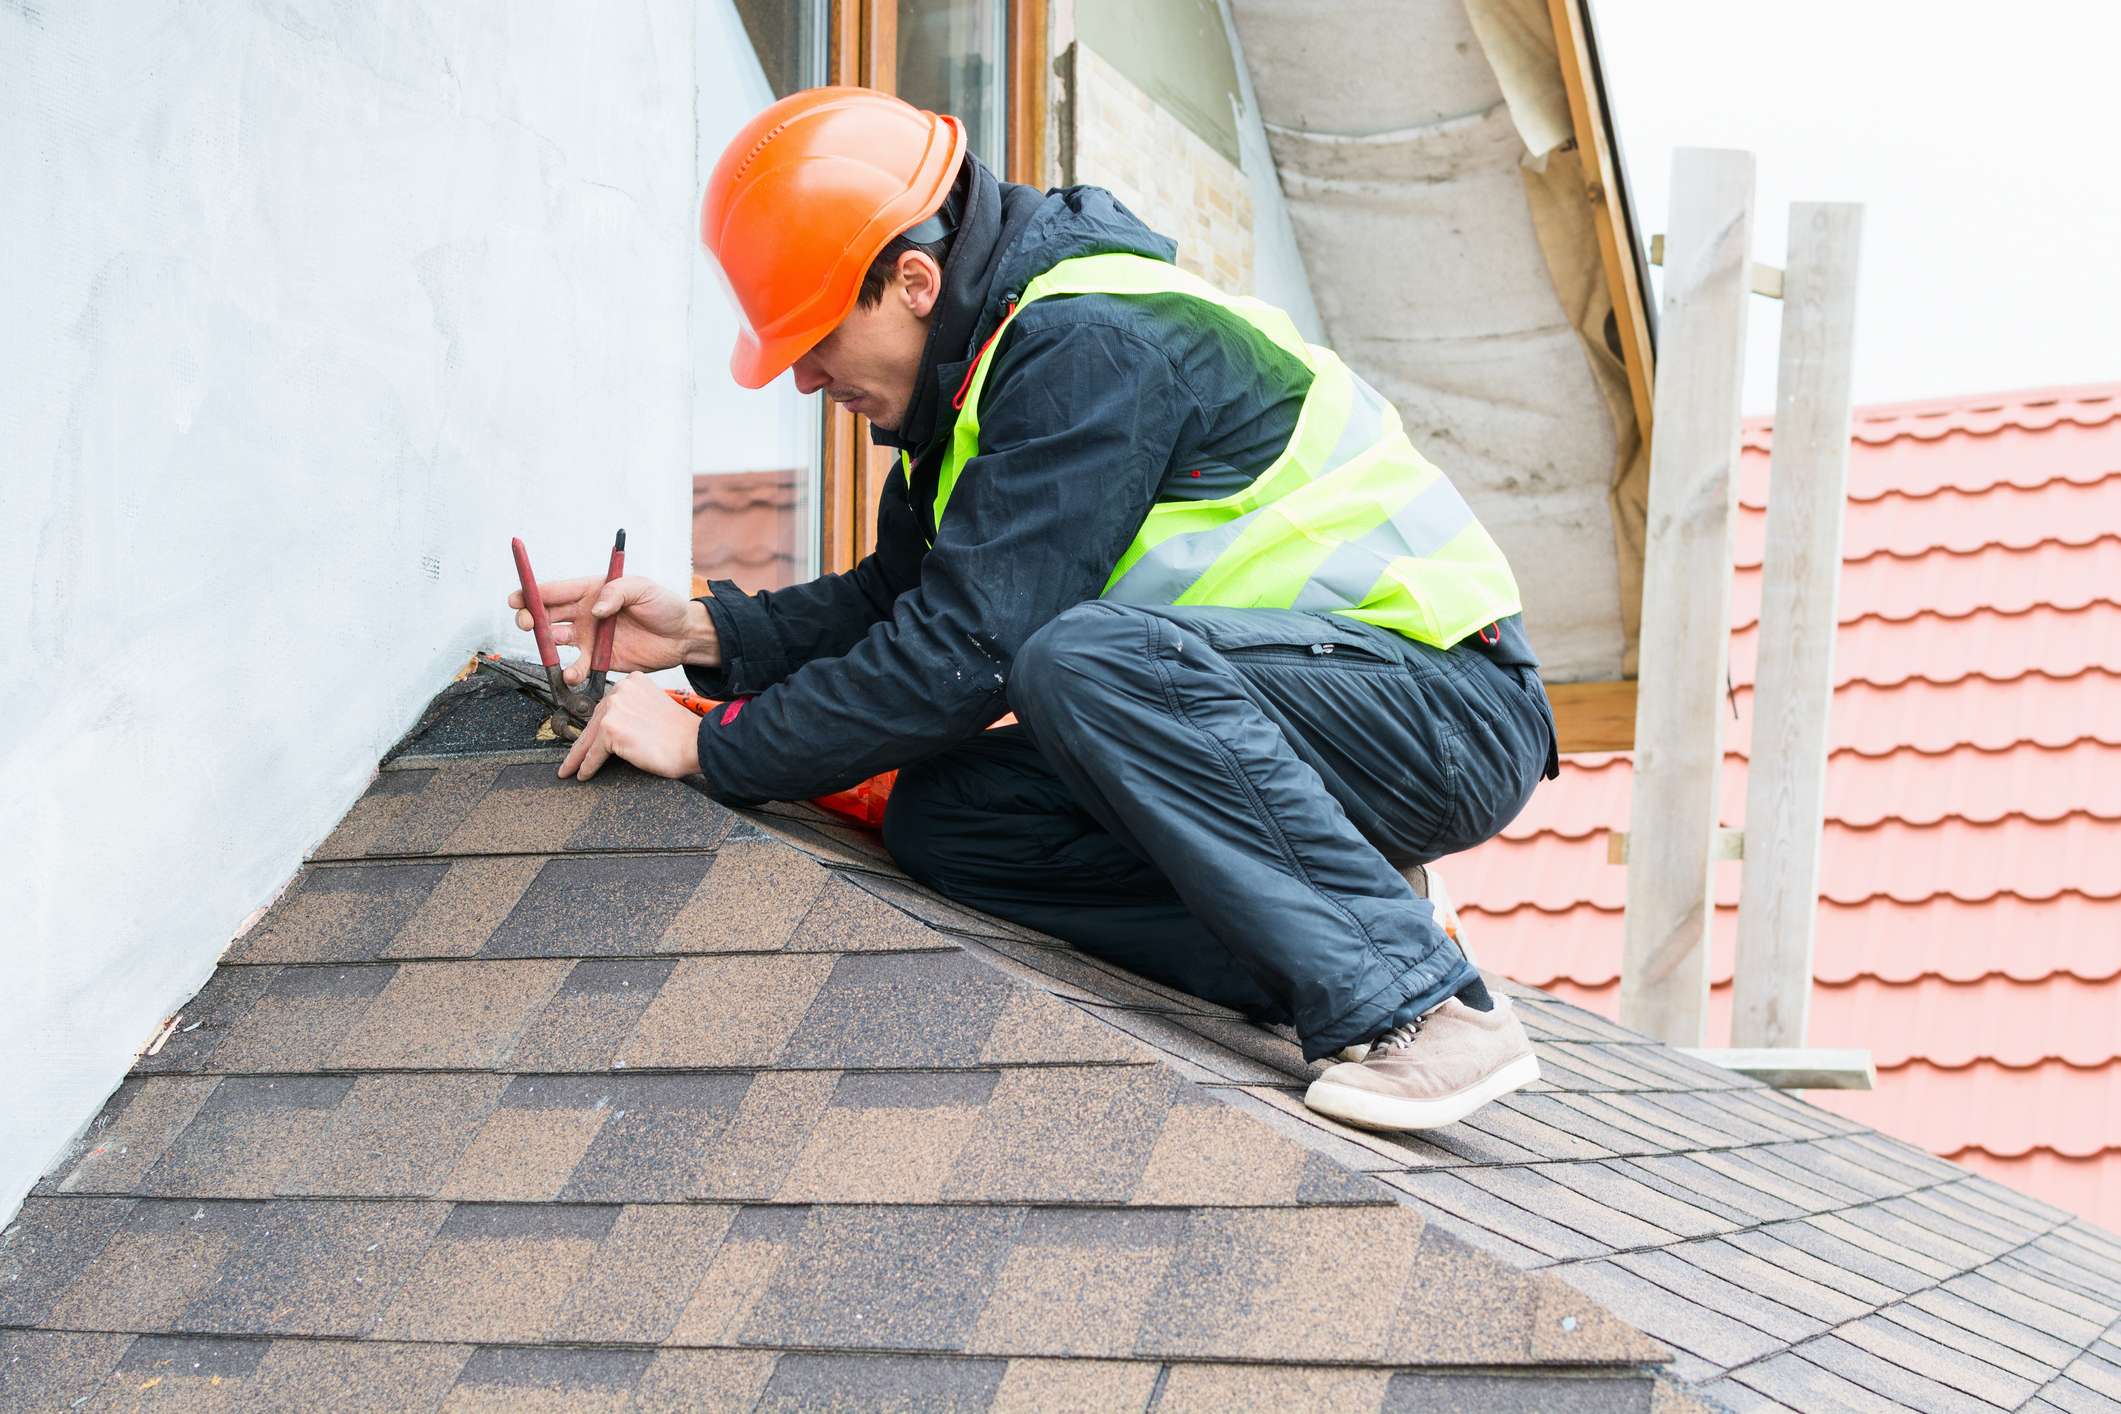 Roofing worker repairing a damaged roof